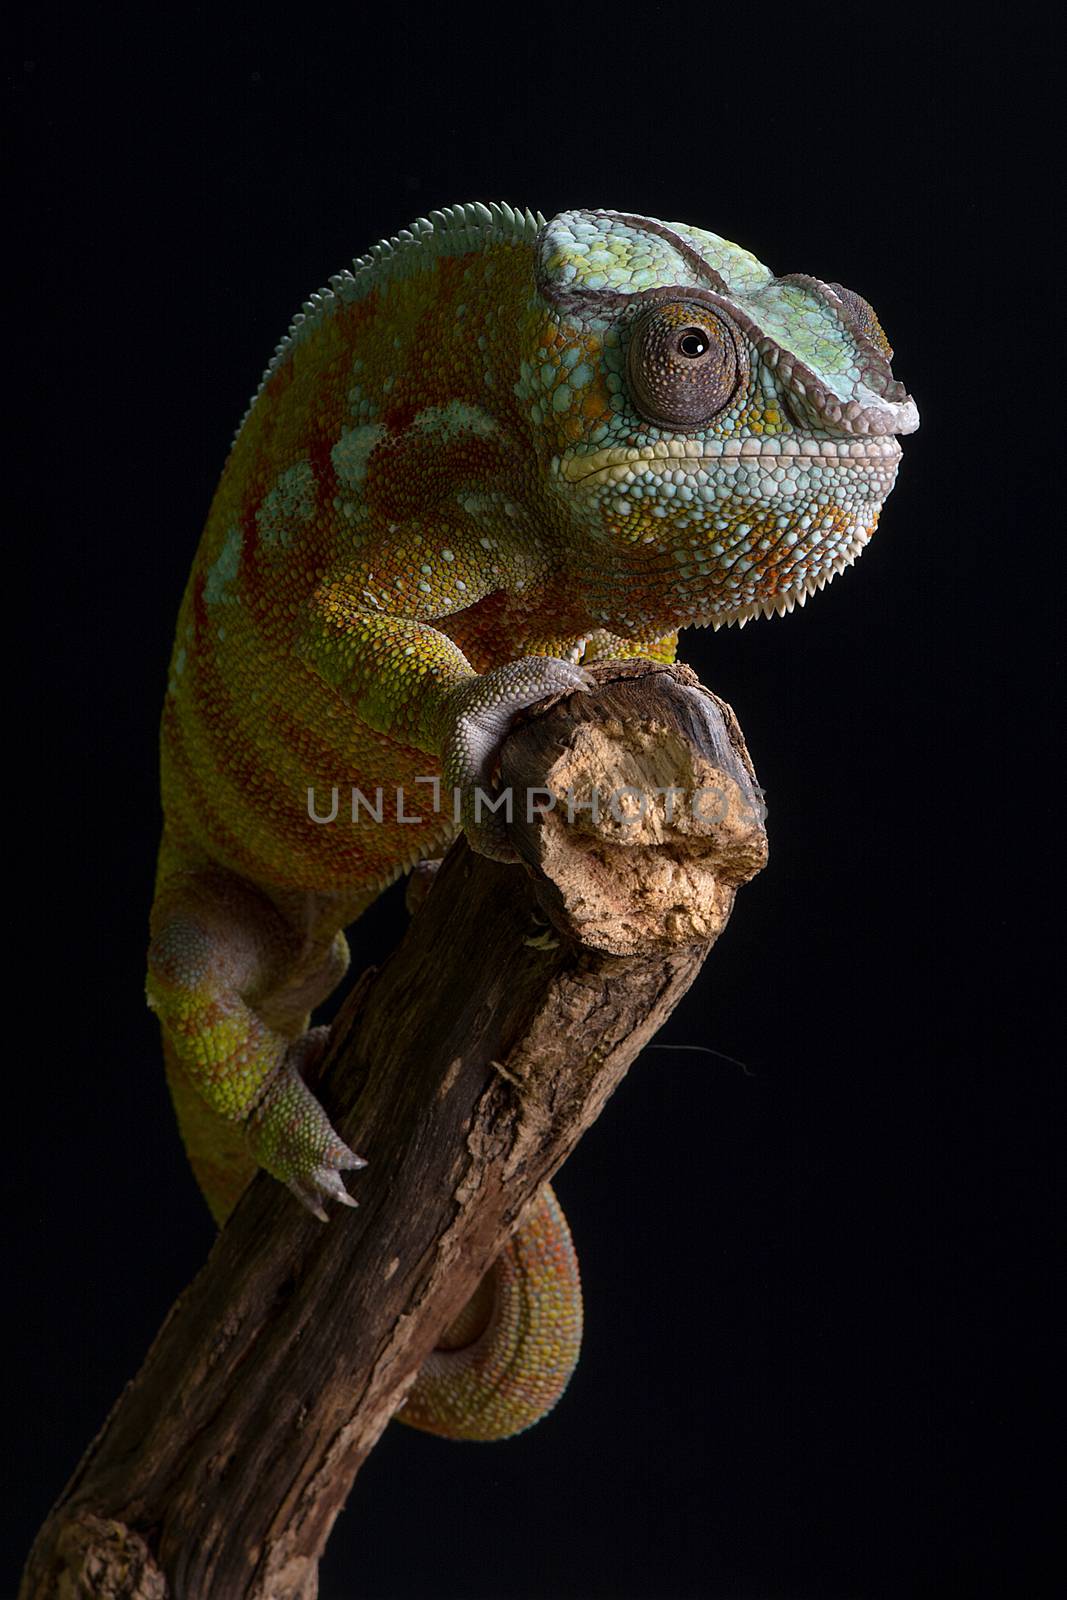 Panther chameleon by alan_tunnicliffe